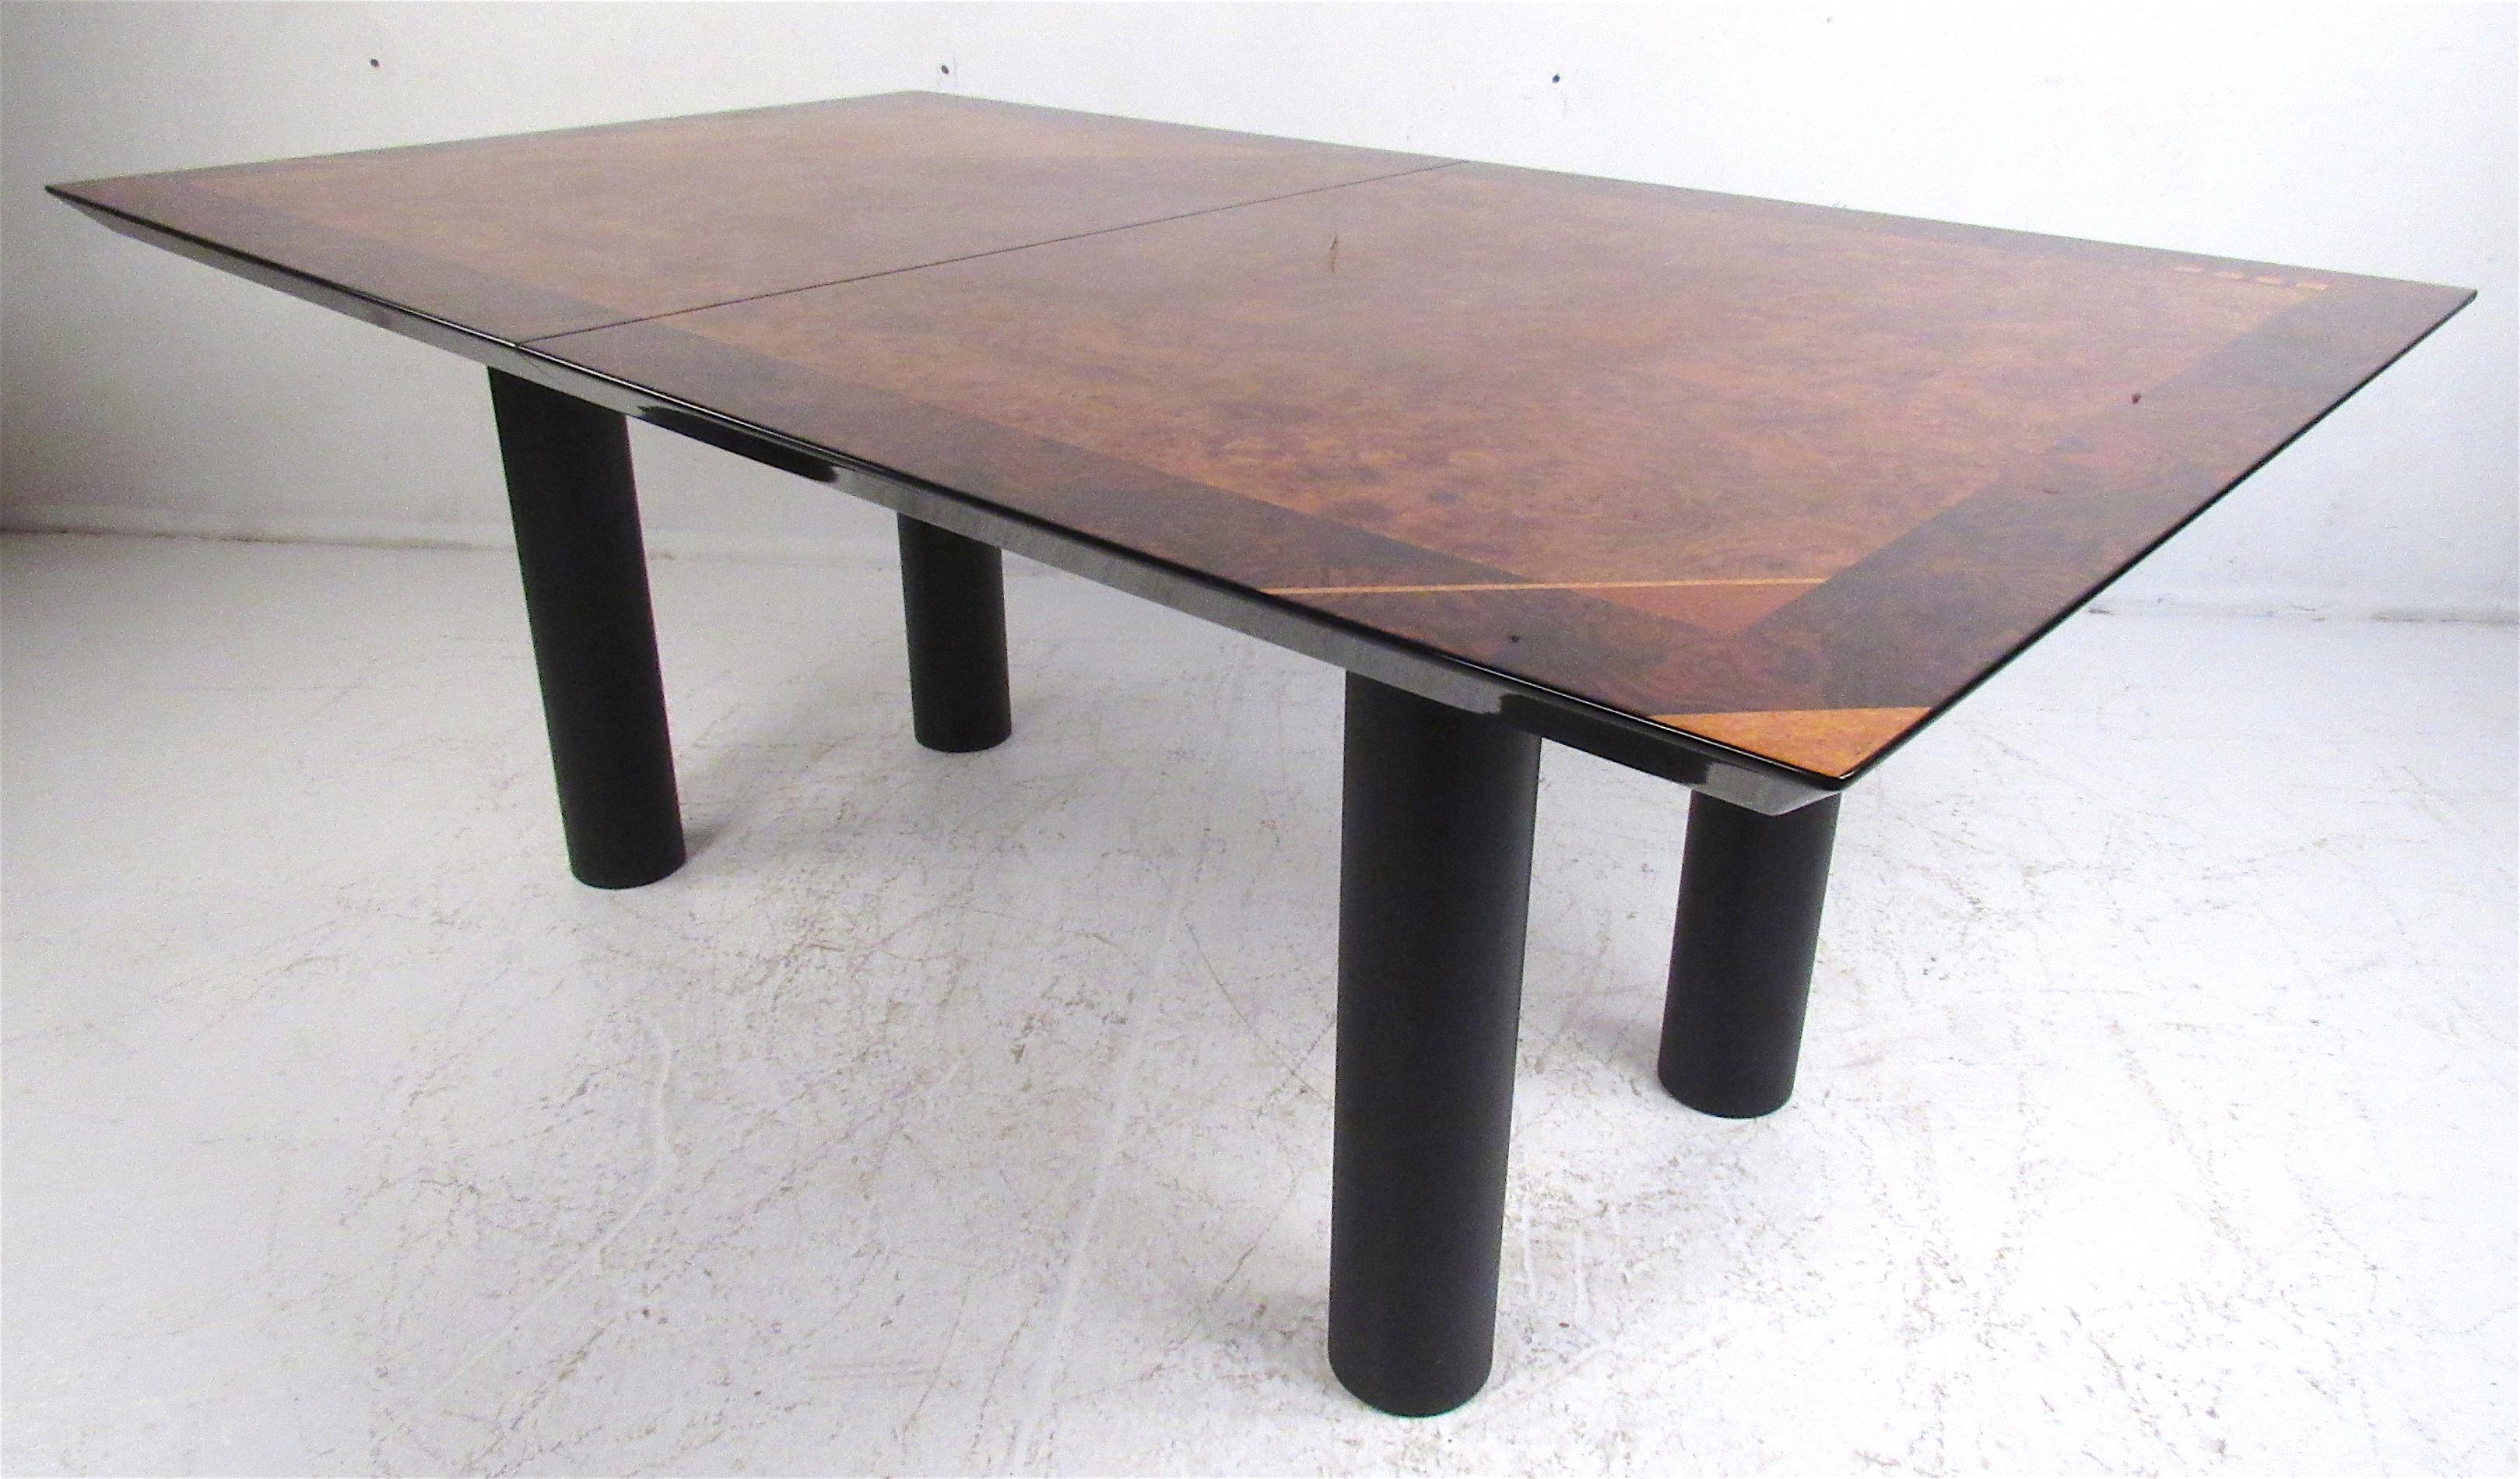 A sleek Italian design that boasts a burl and rosewood top with a stunning lacquered finish and geometric inlays. This unusual table includes one leaf allowing it to extend an additional 19.5 inches in width.
Please confirm location NY or NJ.